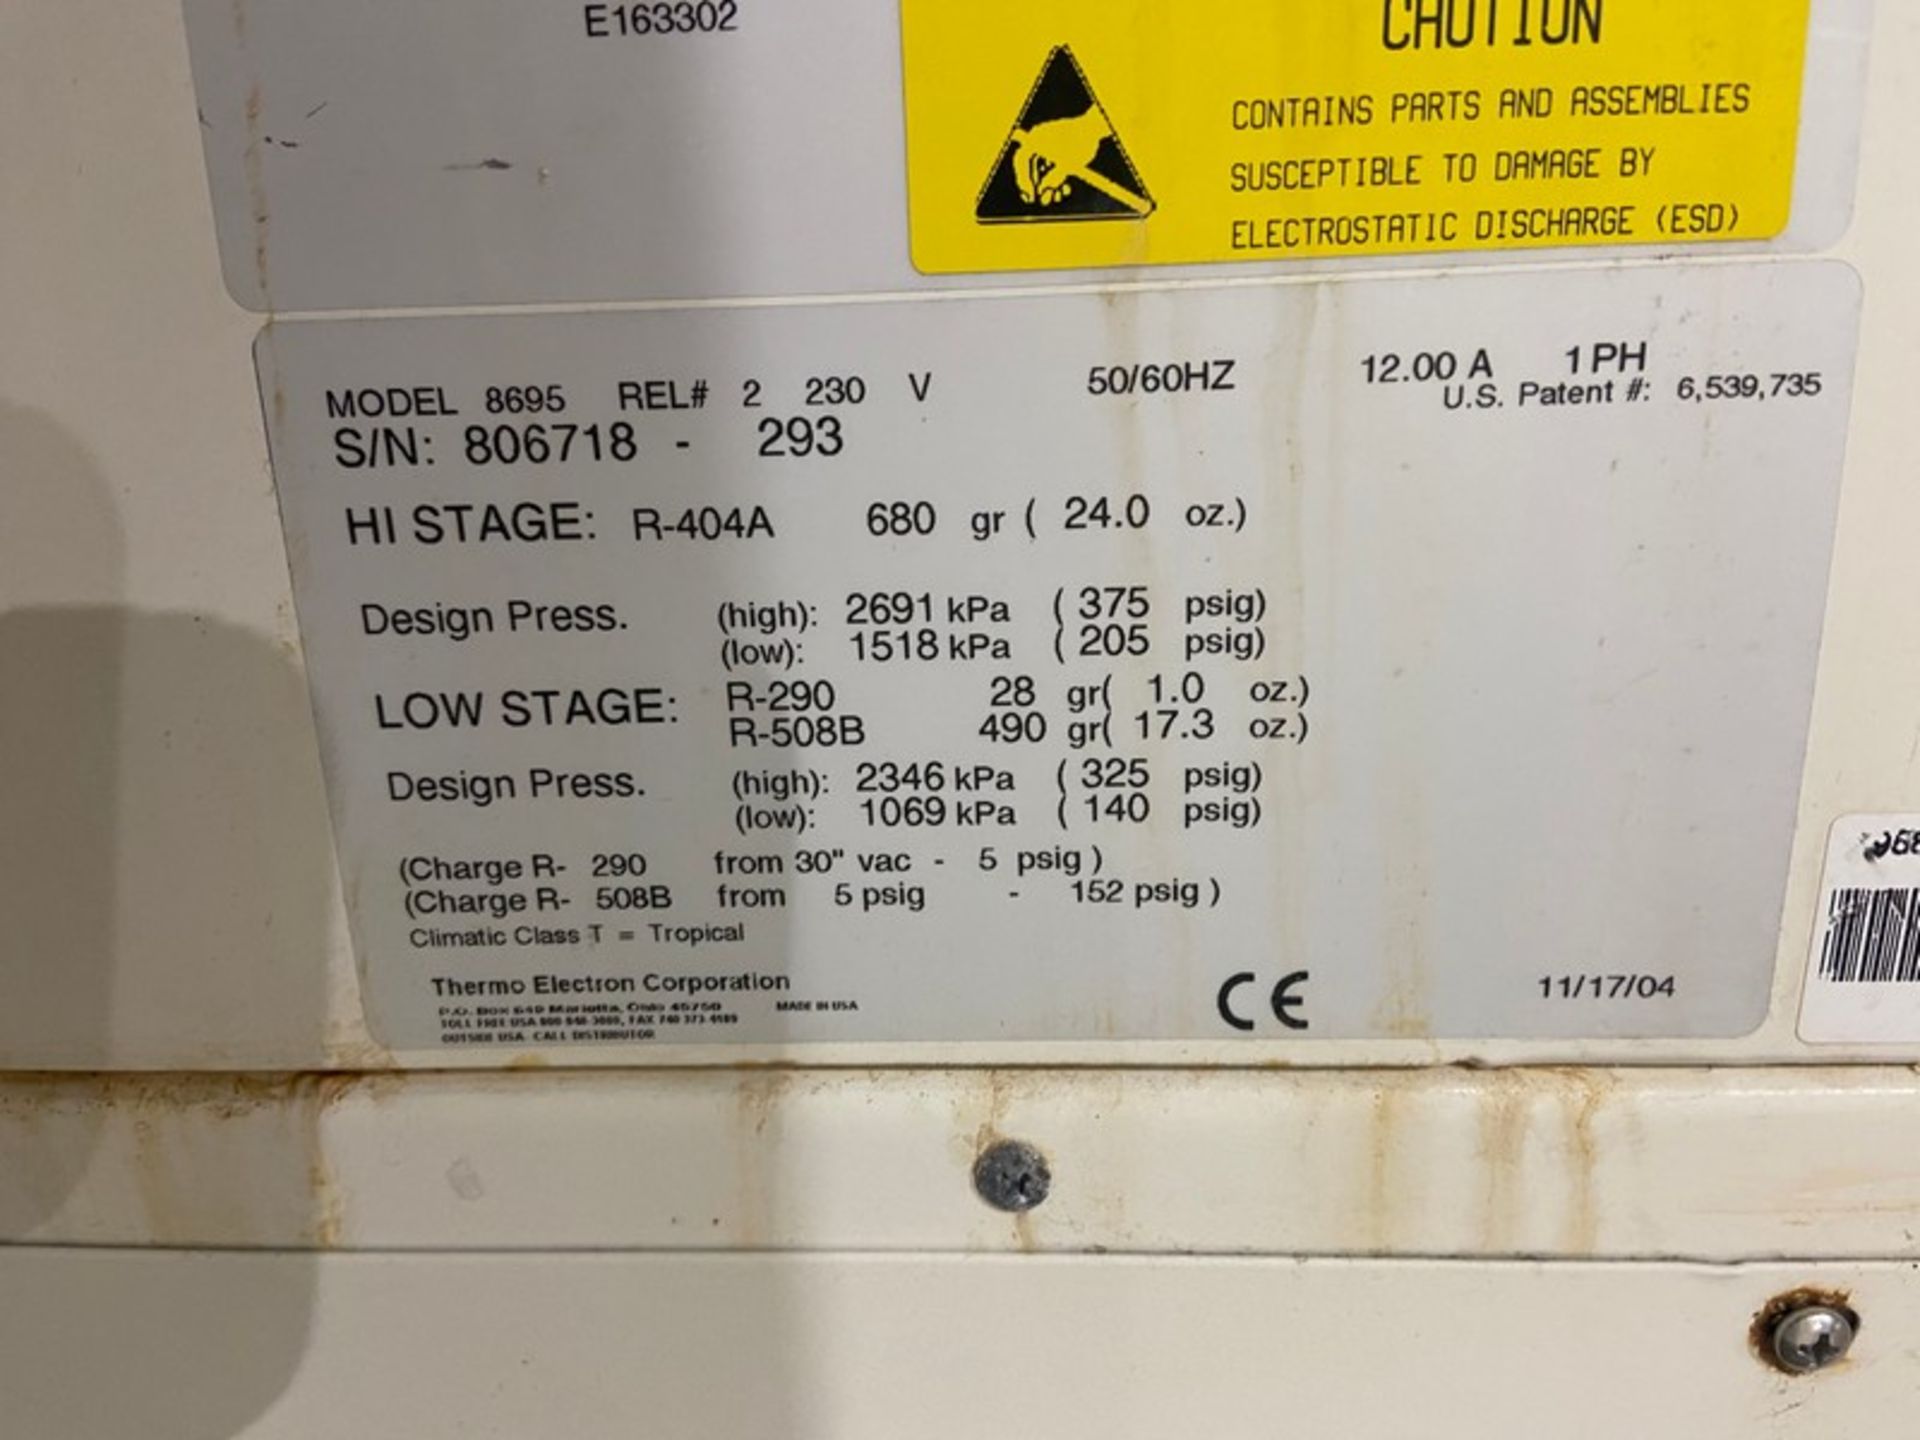 Thermo Electron Corporation ULT Laboratory Freezer , Forma -86C, M/N 8695, S/N 806718, 230 Volts, - Image 6 of 6